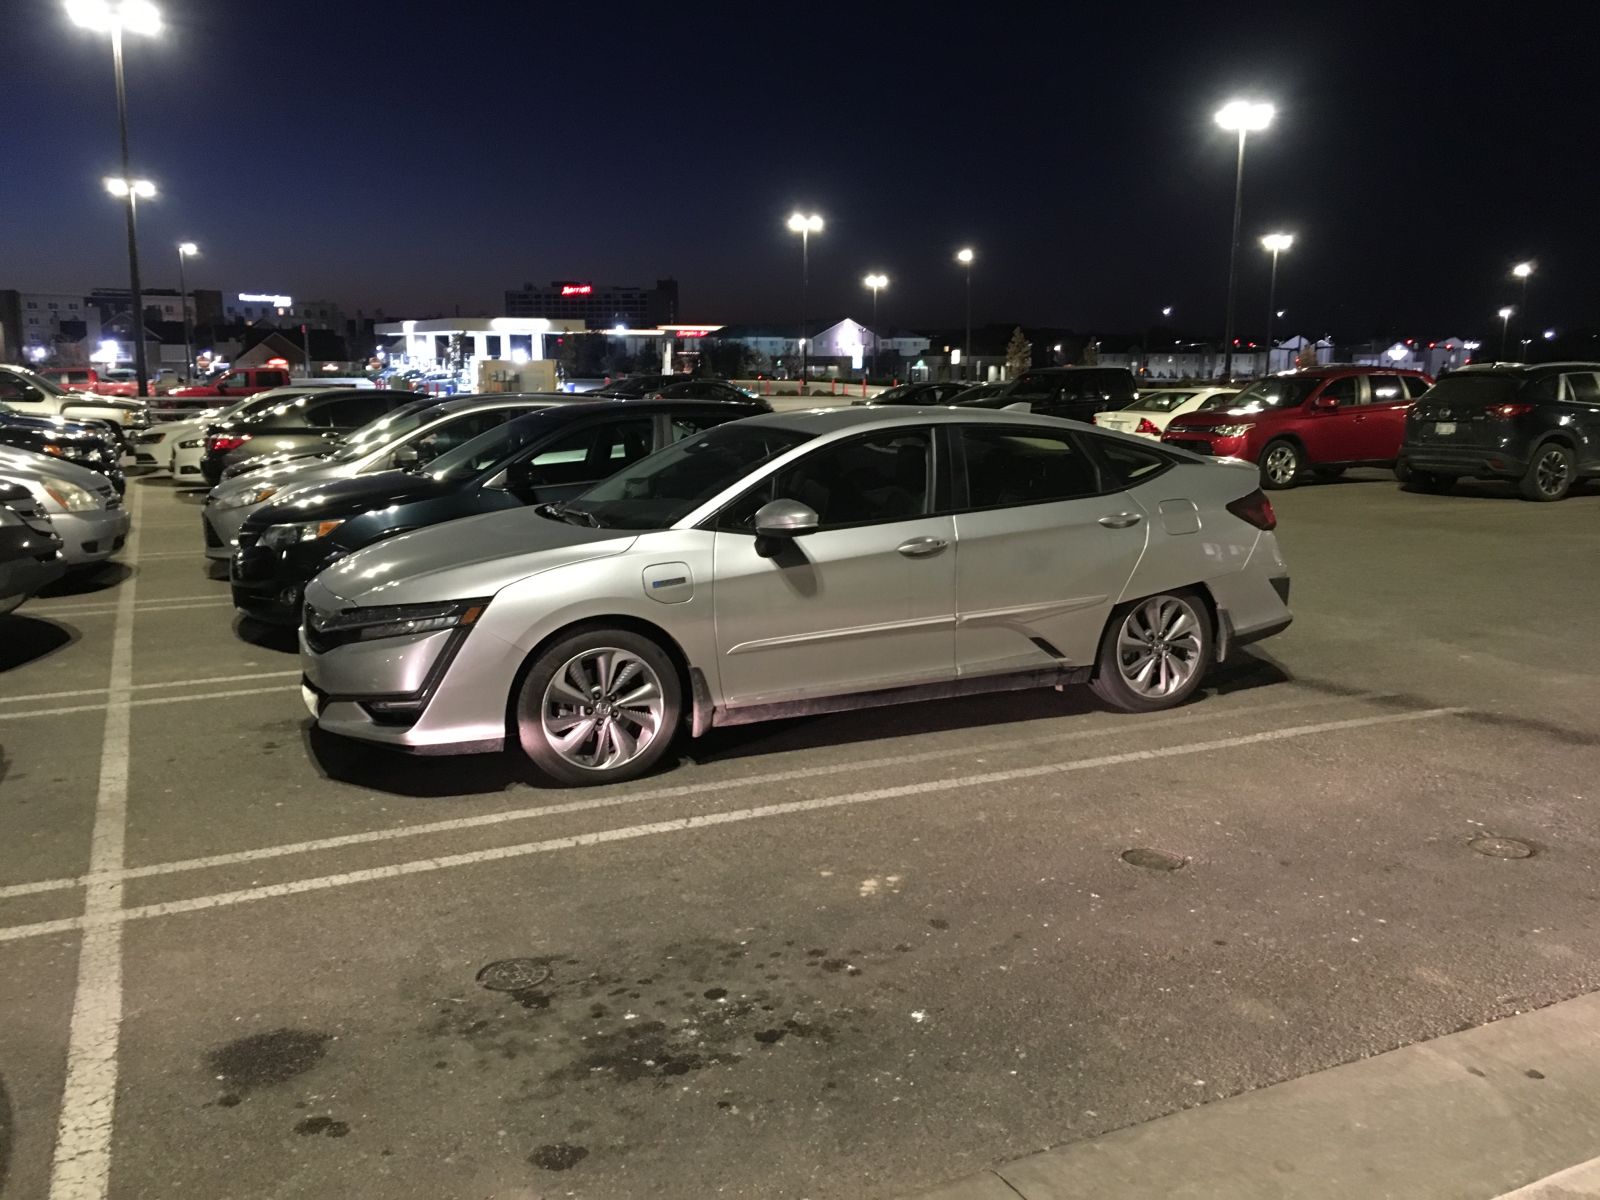 Illustration for article titled Saw my first Honda Clarity tonight